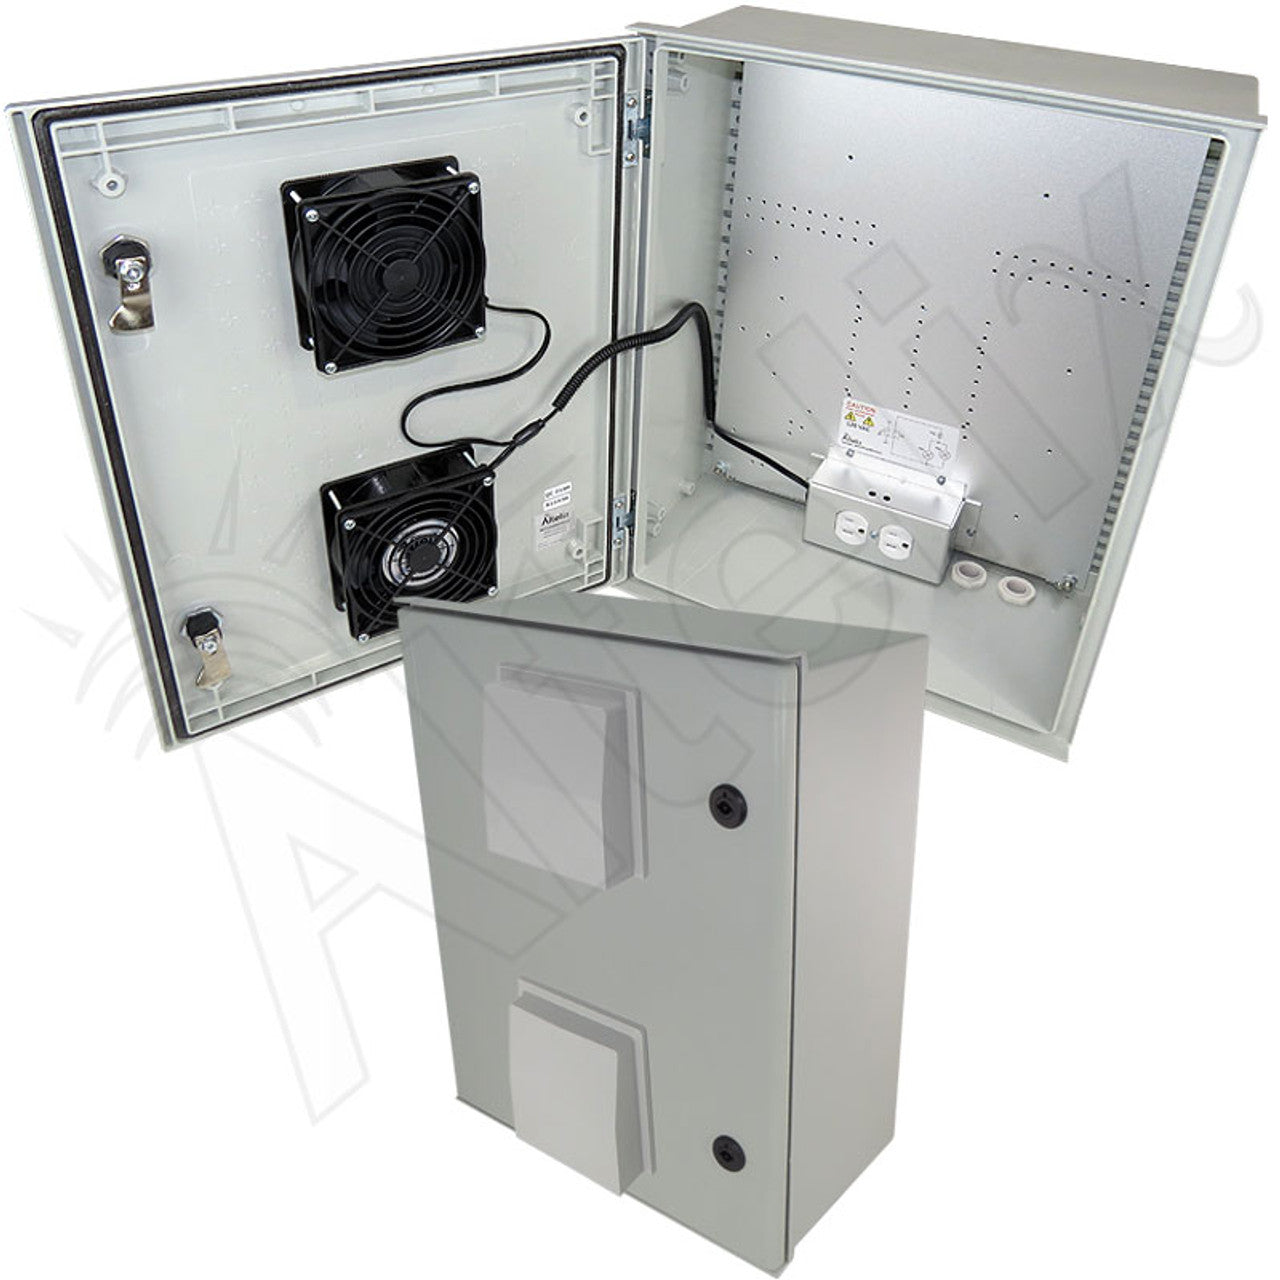 Altelix Vented Fiberglass Weatherproof NEMA Enclosure with Cooling Fan, 200W Heater and 120 VAC Outlets-4